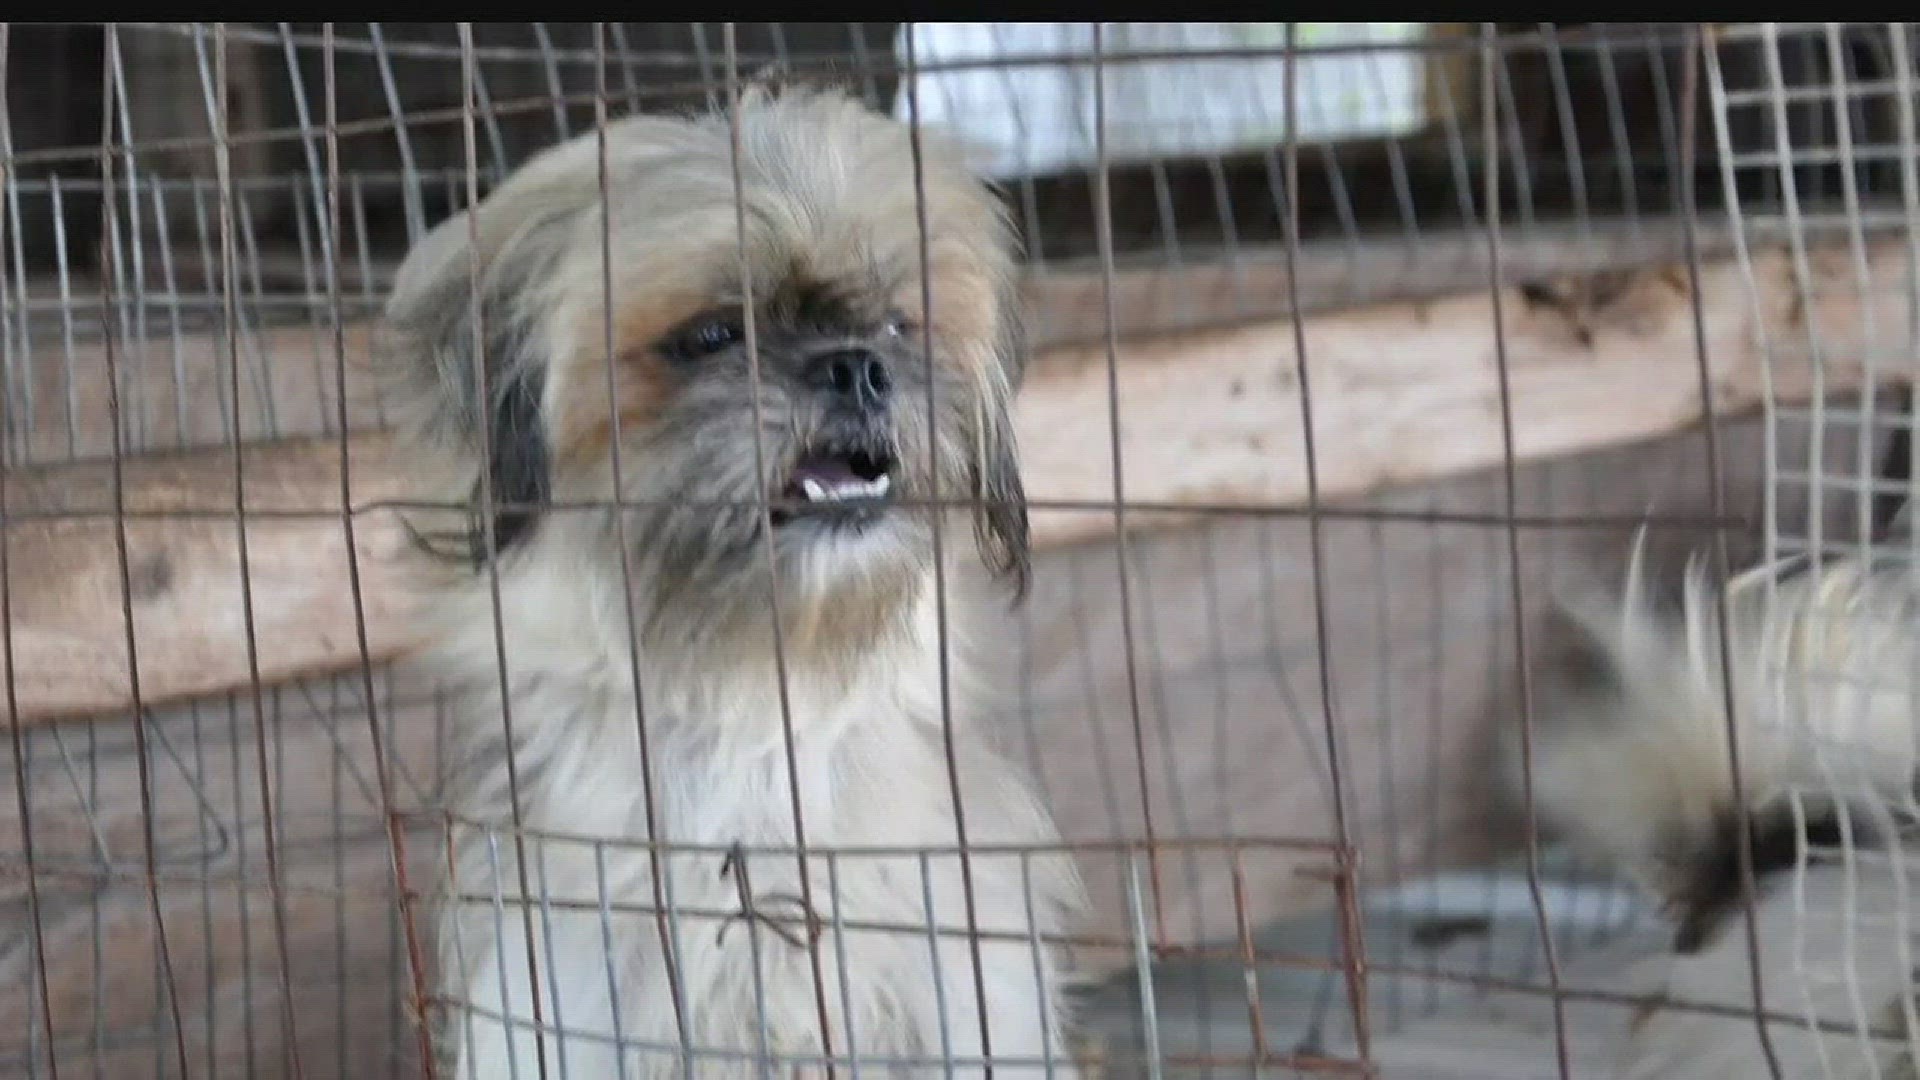 17 Shih Tzu puppies rescued from puppy mill in Ben Bolt, Texas 